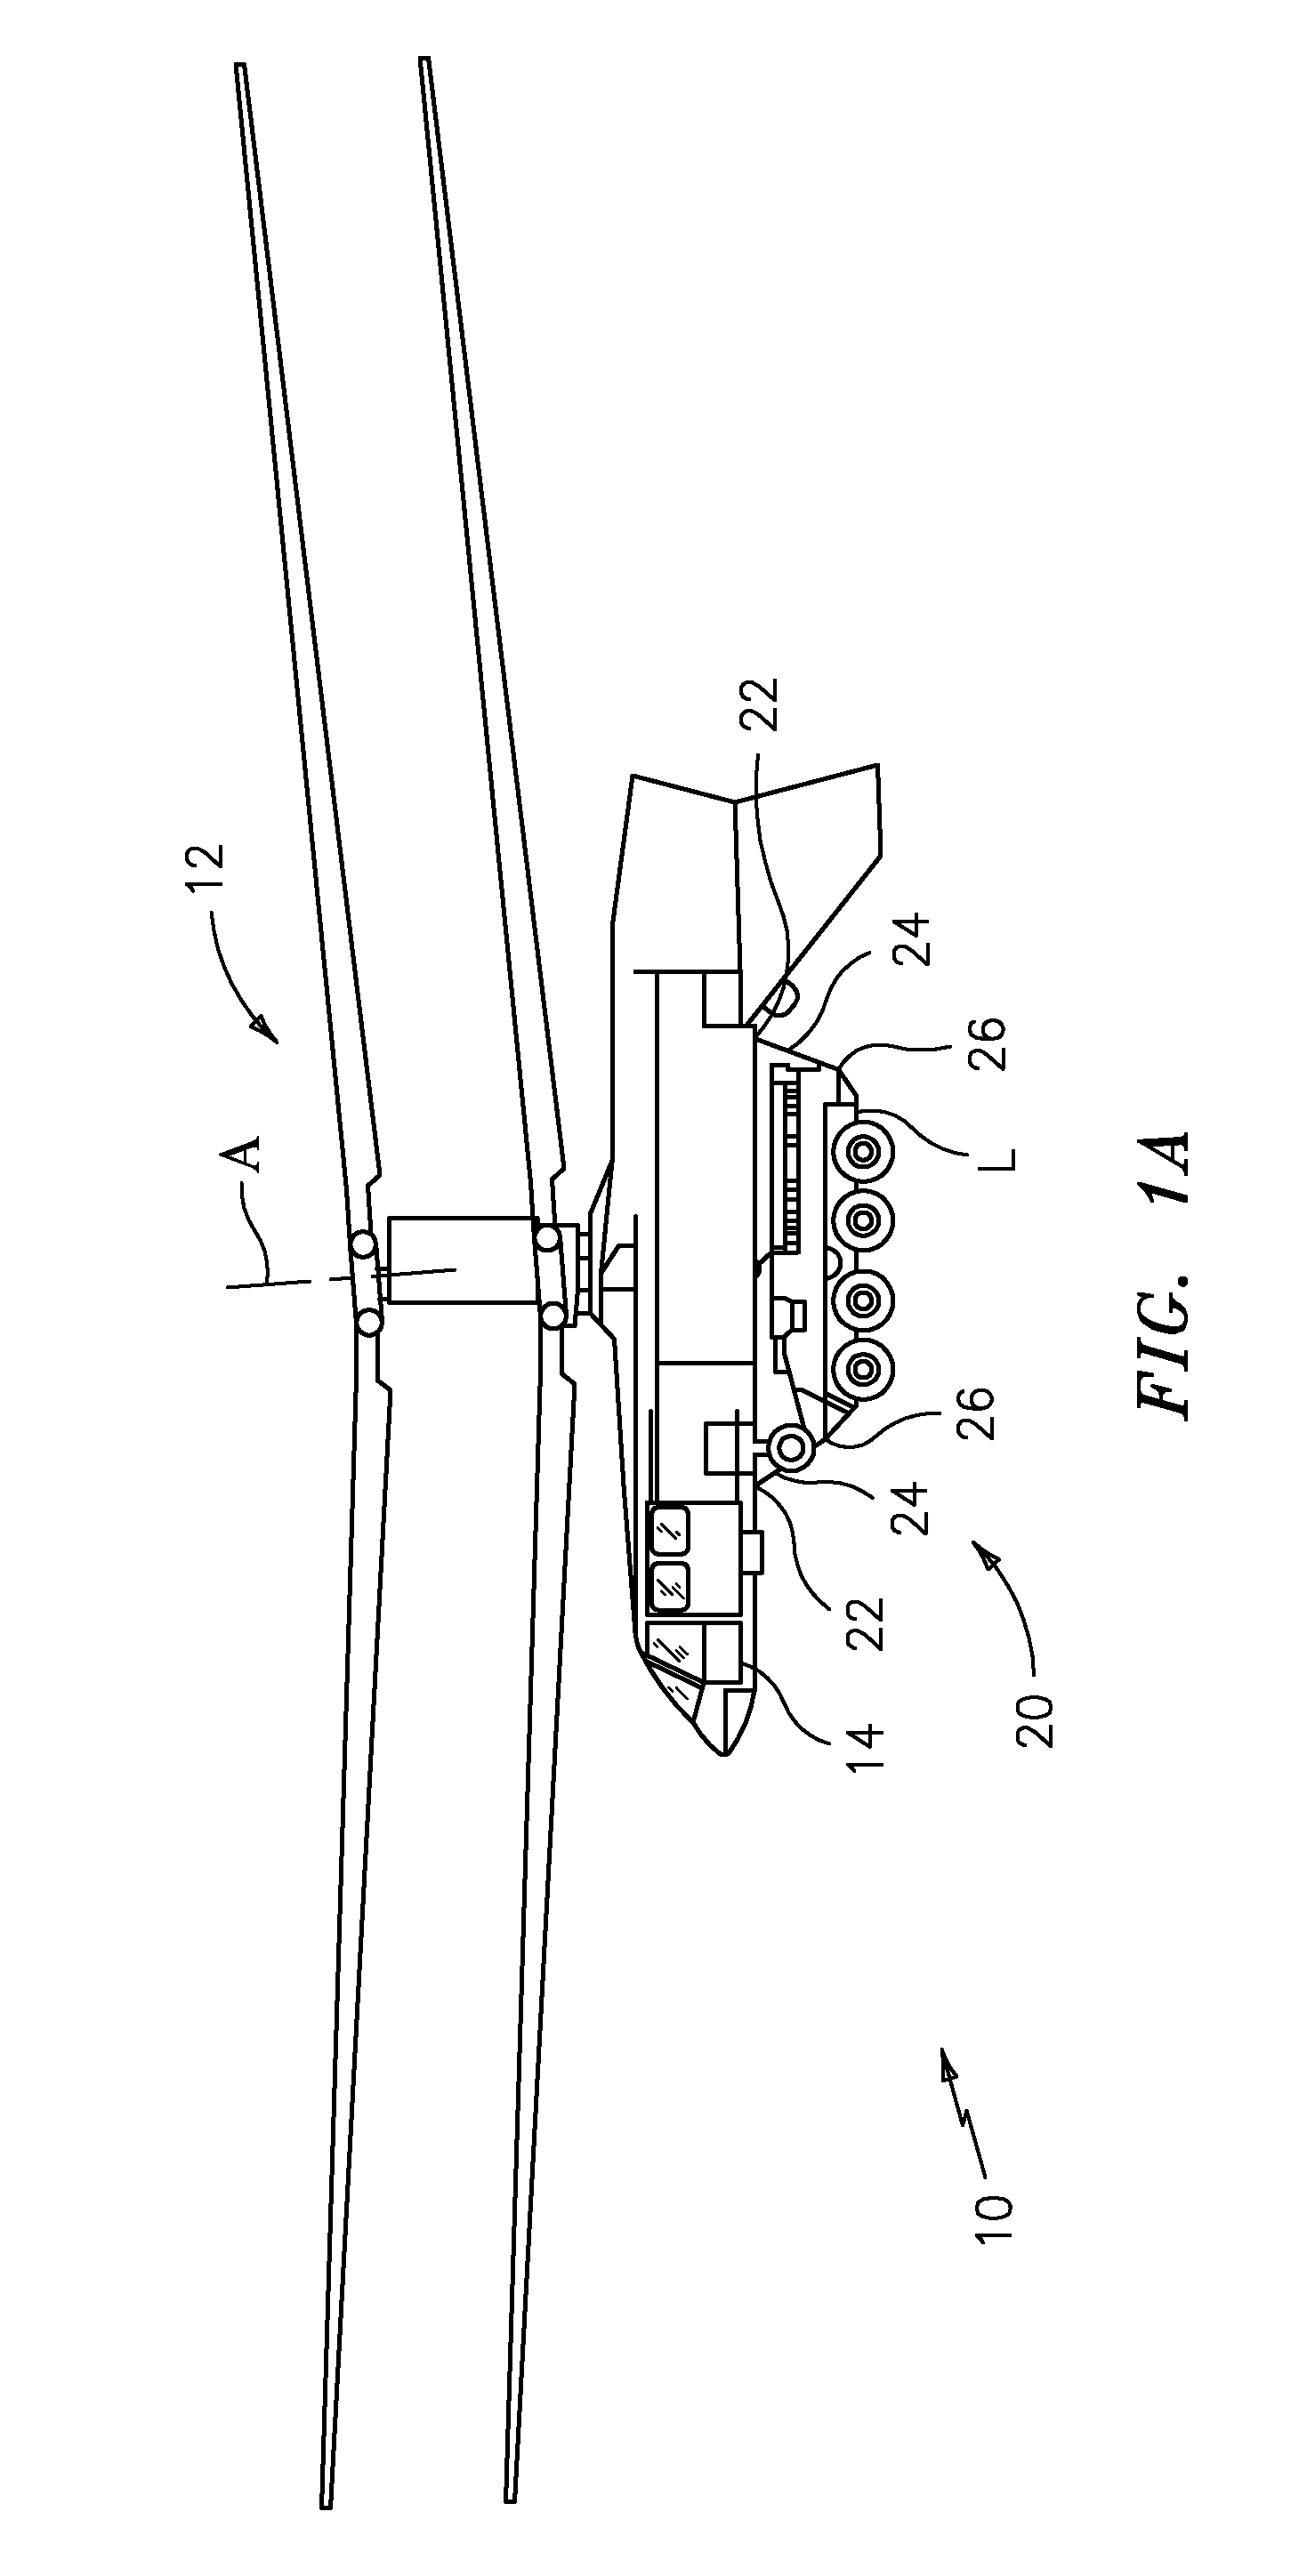 Radio frequency emitting hook system for a rotary-wing aircraft external load handling